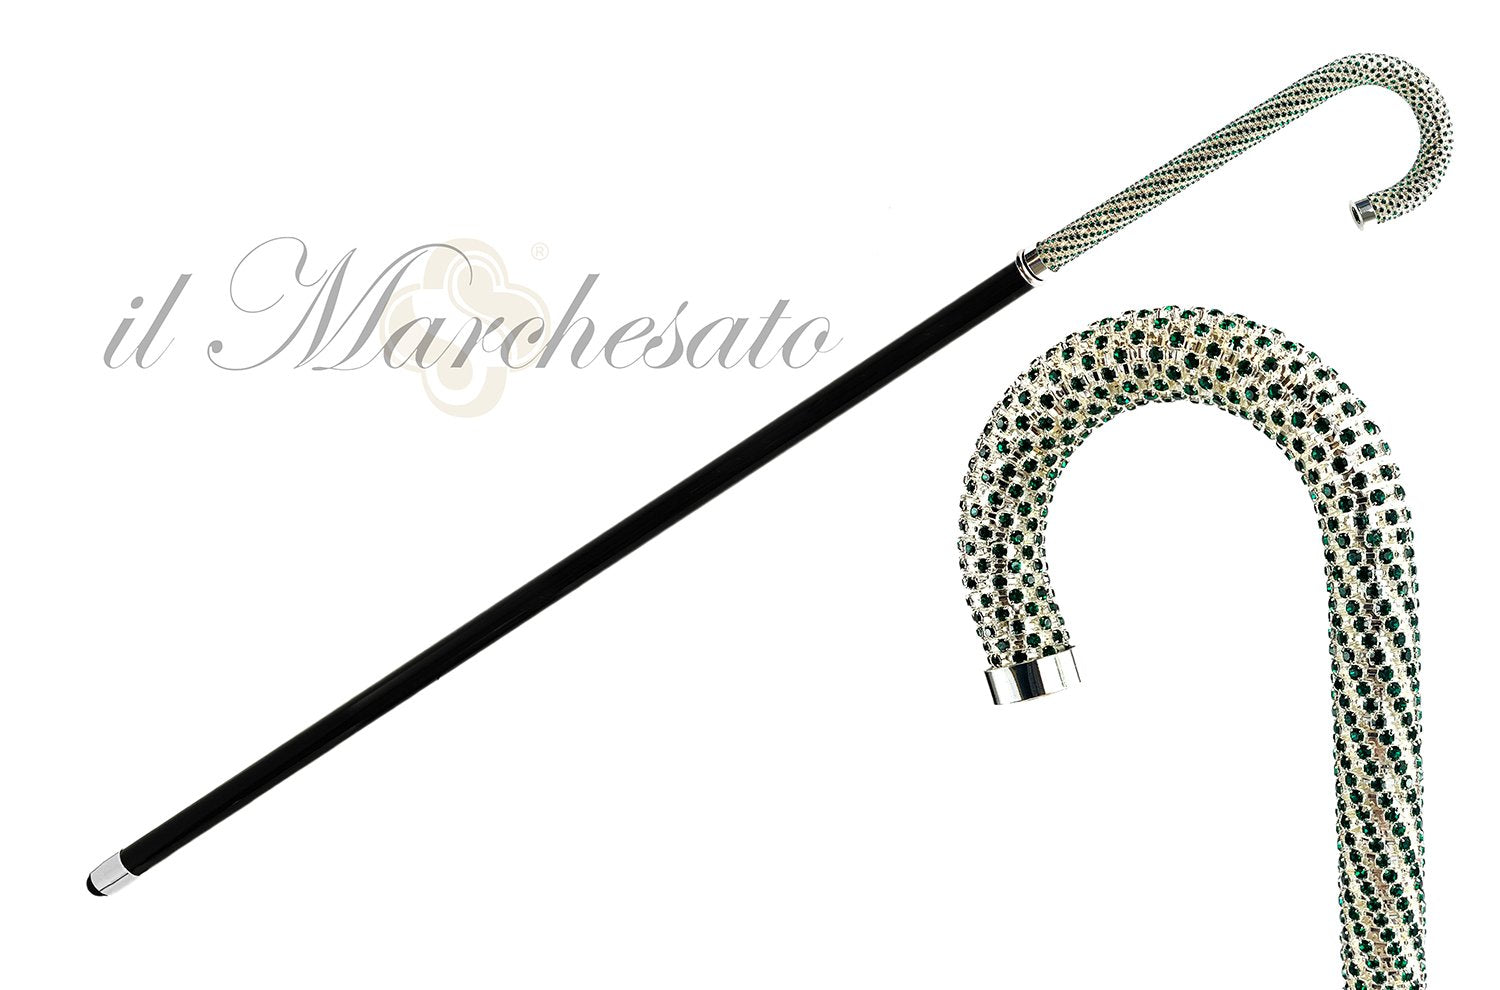 Luxury Walking stick Encrusted with hundreds Green Crystals